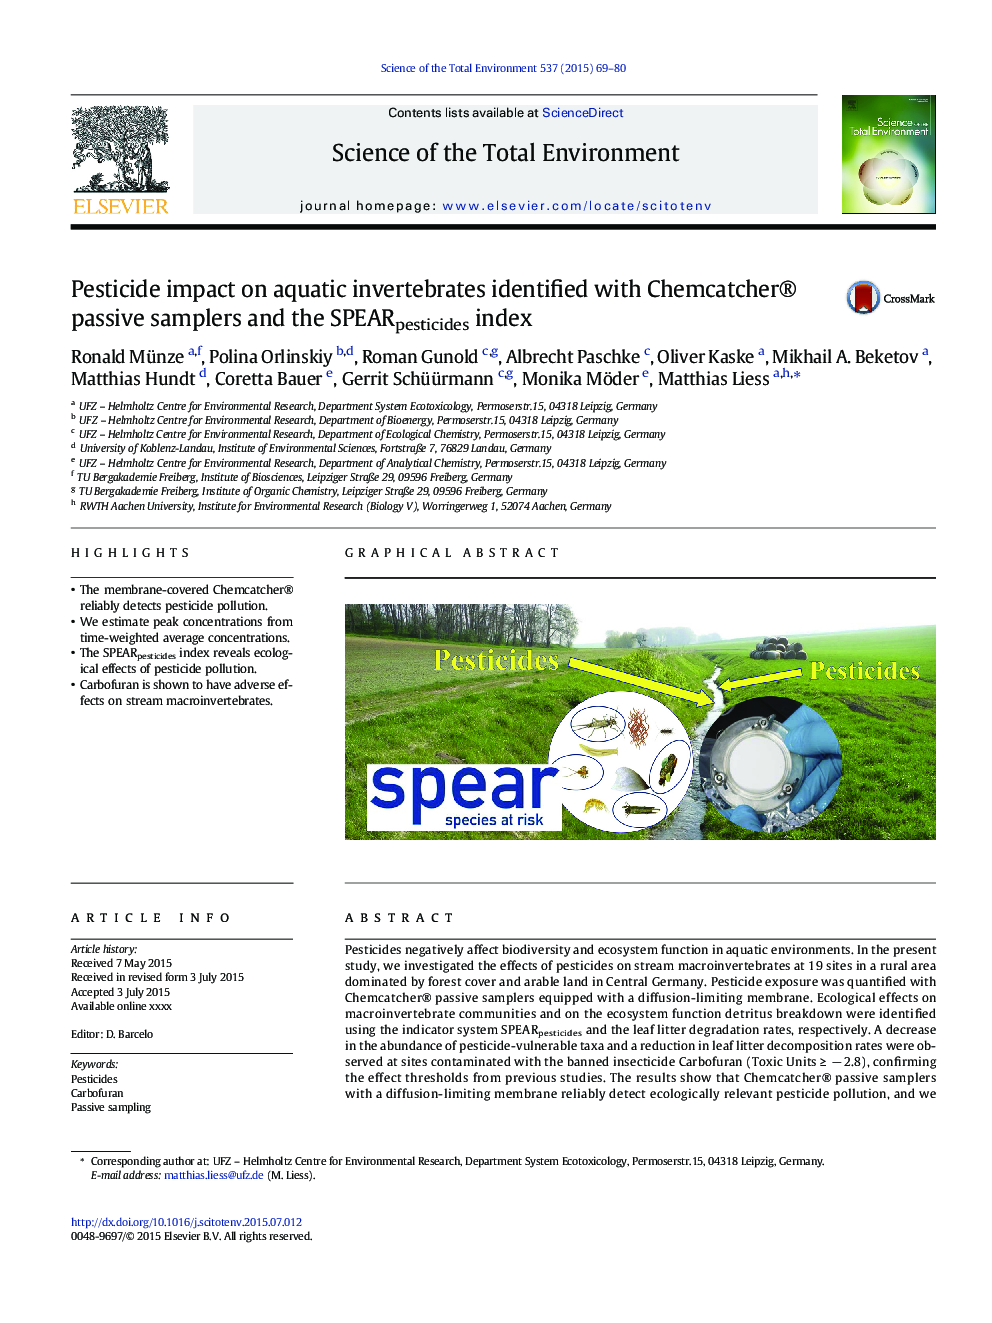 Pesticide impact on aquatic invertebrates identified with Chemcatcher® passive samplers and the SPEARpesticides index